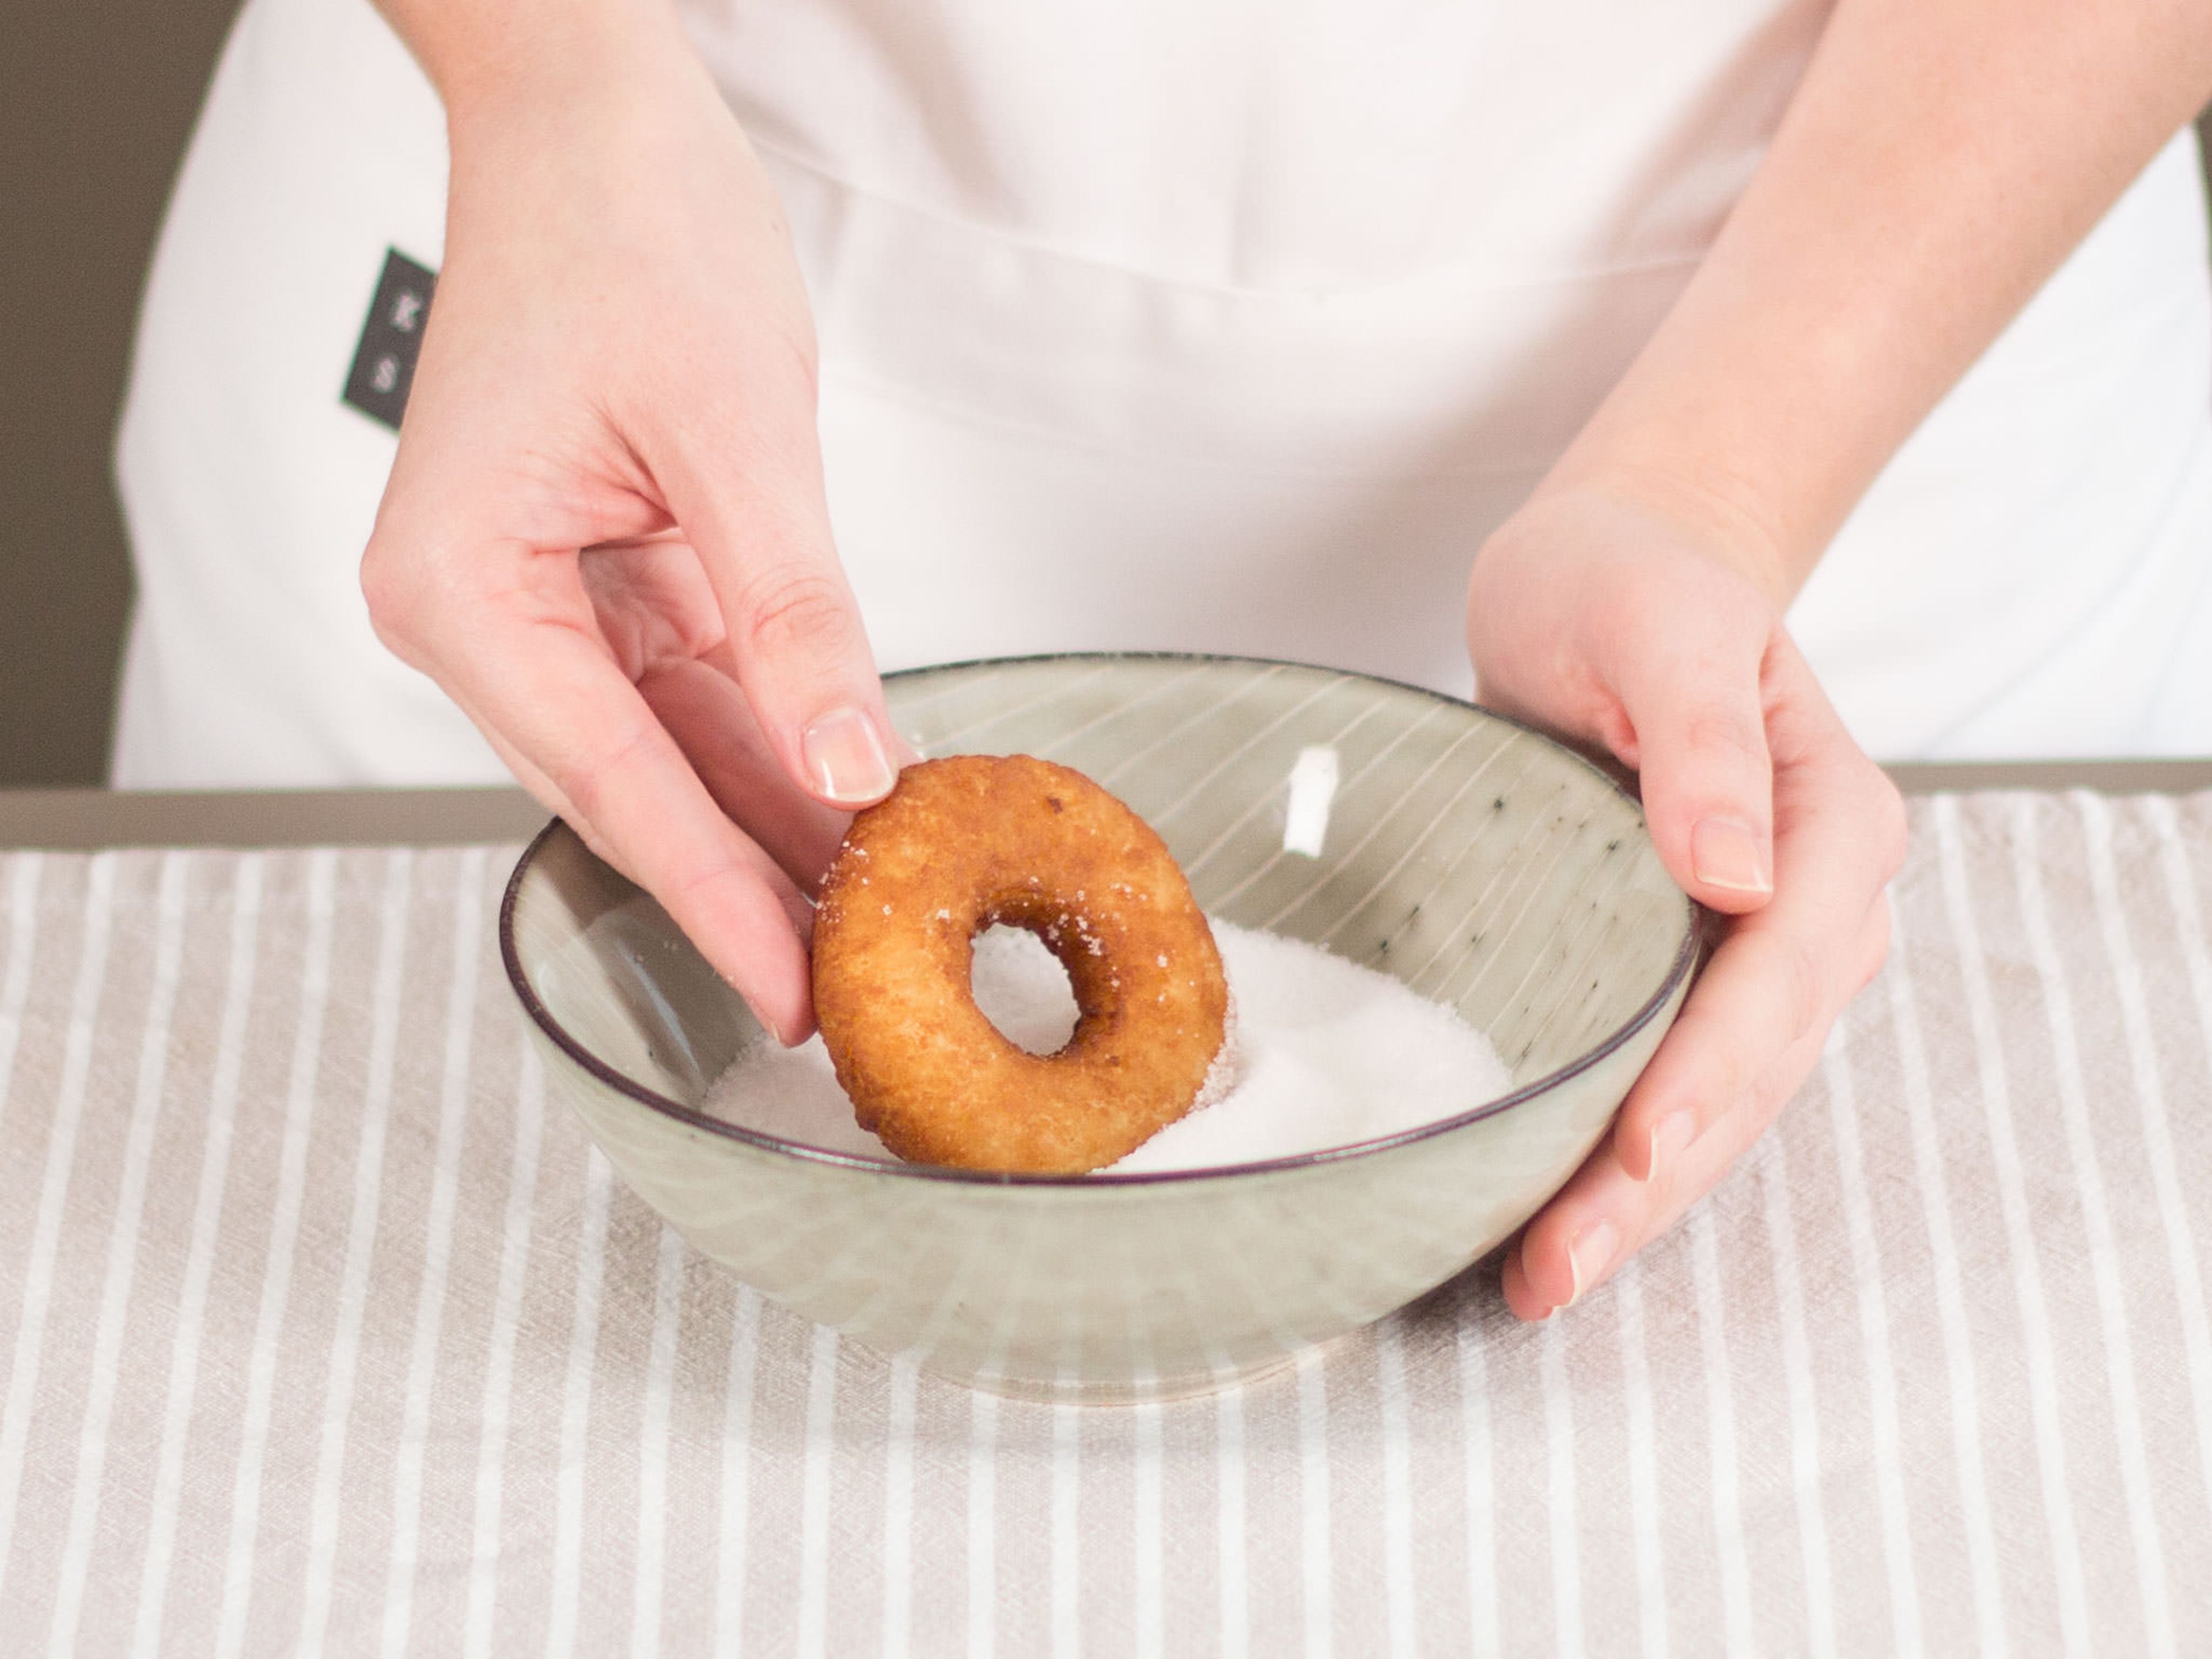 Pour sugar into a small bowl. Roll bombolini in sugar and transfer to a plate for serving. Enjoy!